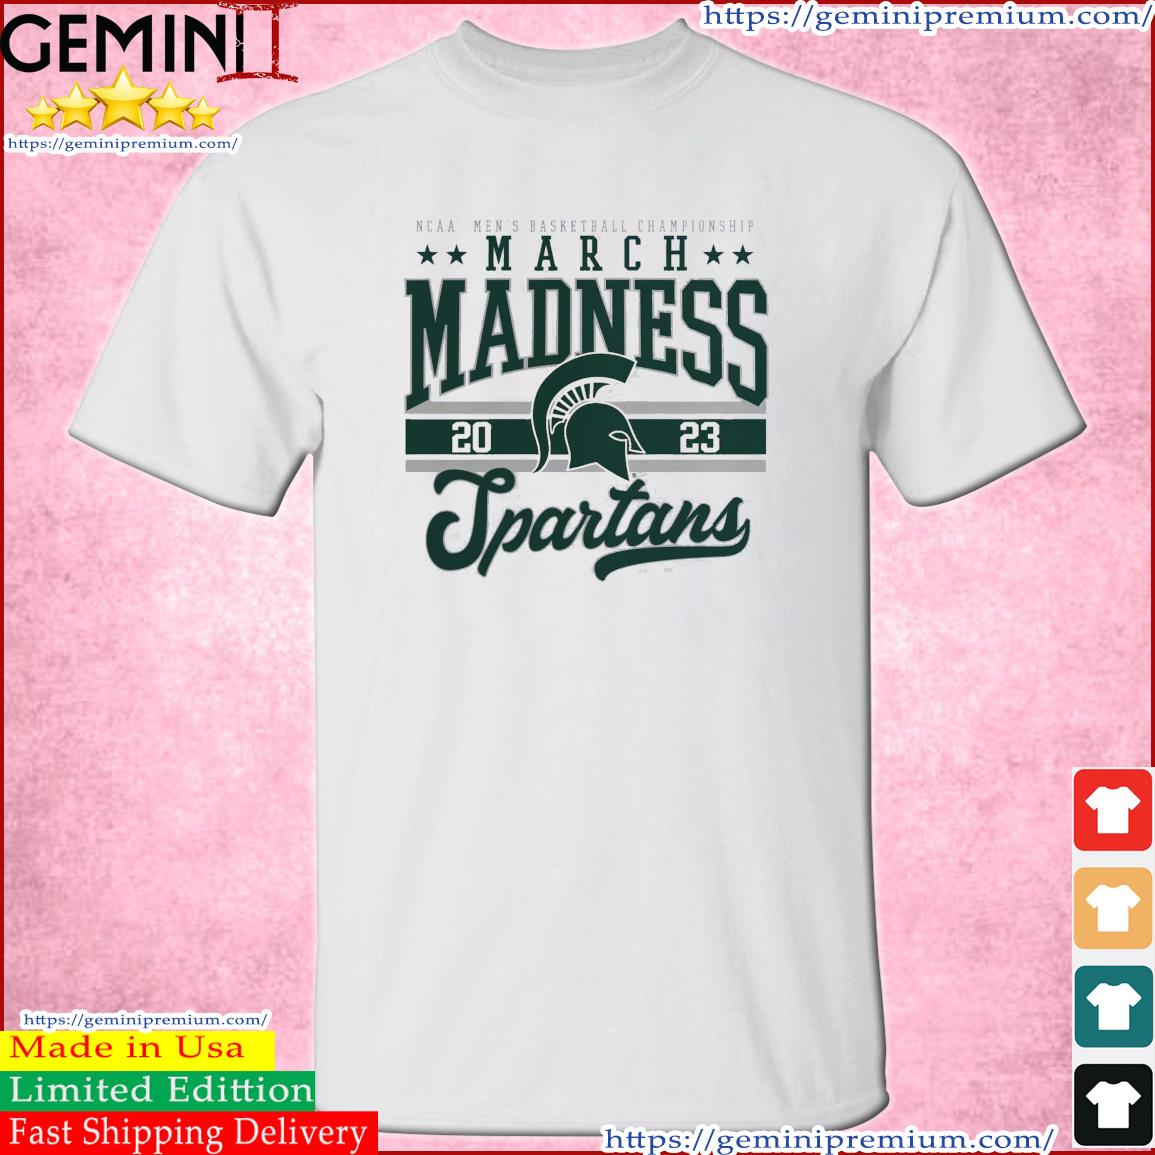 Michigan State Spartans NCAA Men's Basketball Tournament March Madness 2023 Shirt